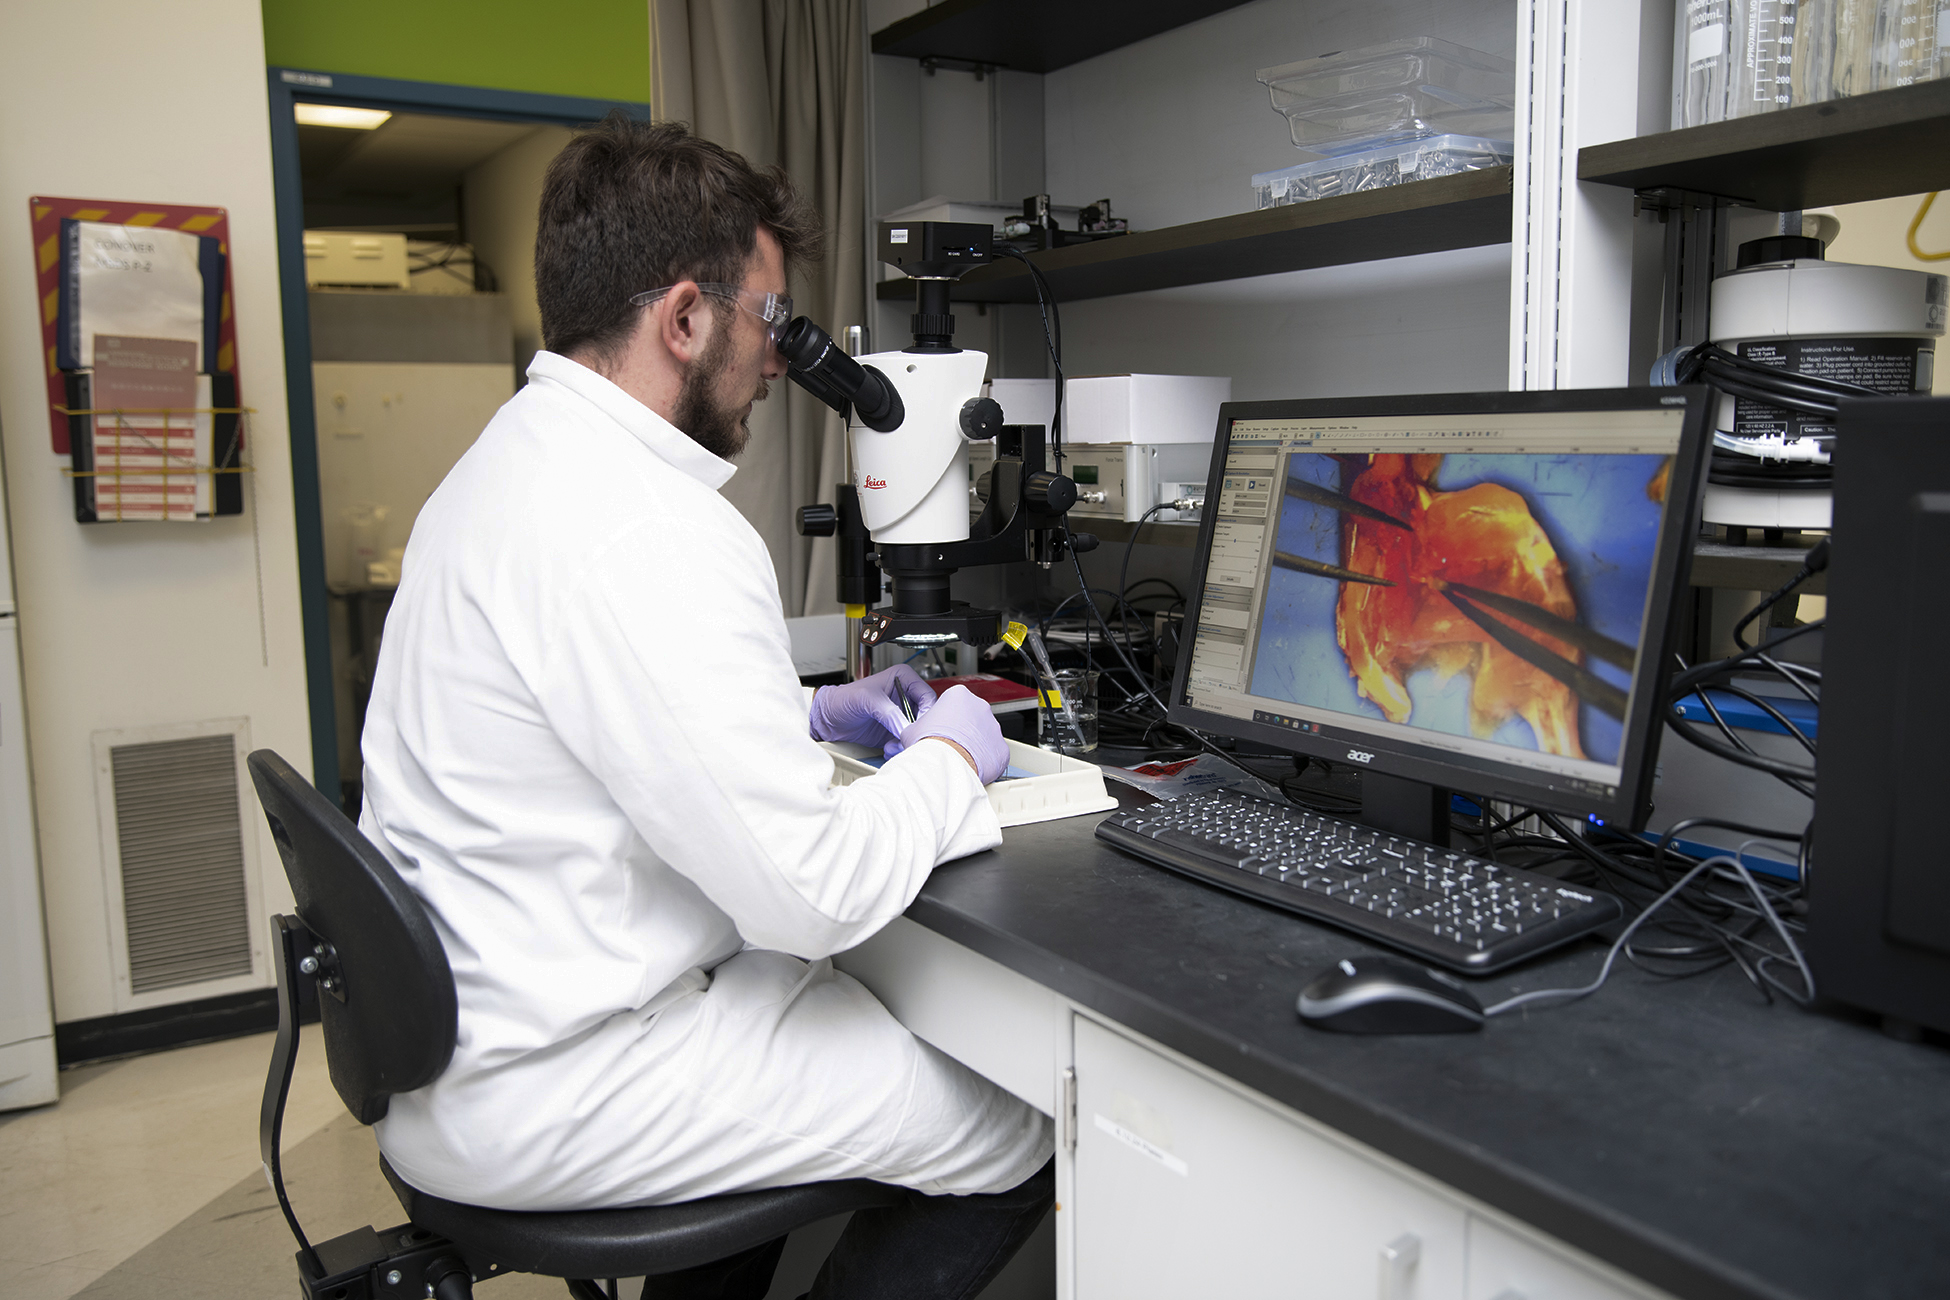 Man in white lab coat looks through microscope with image projected on computer screen